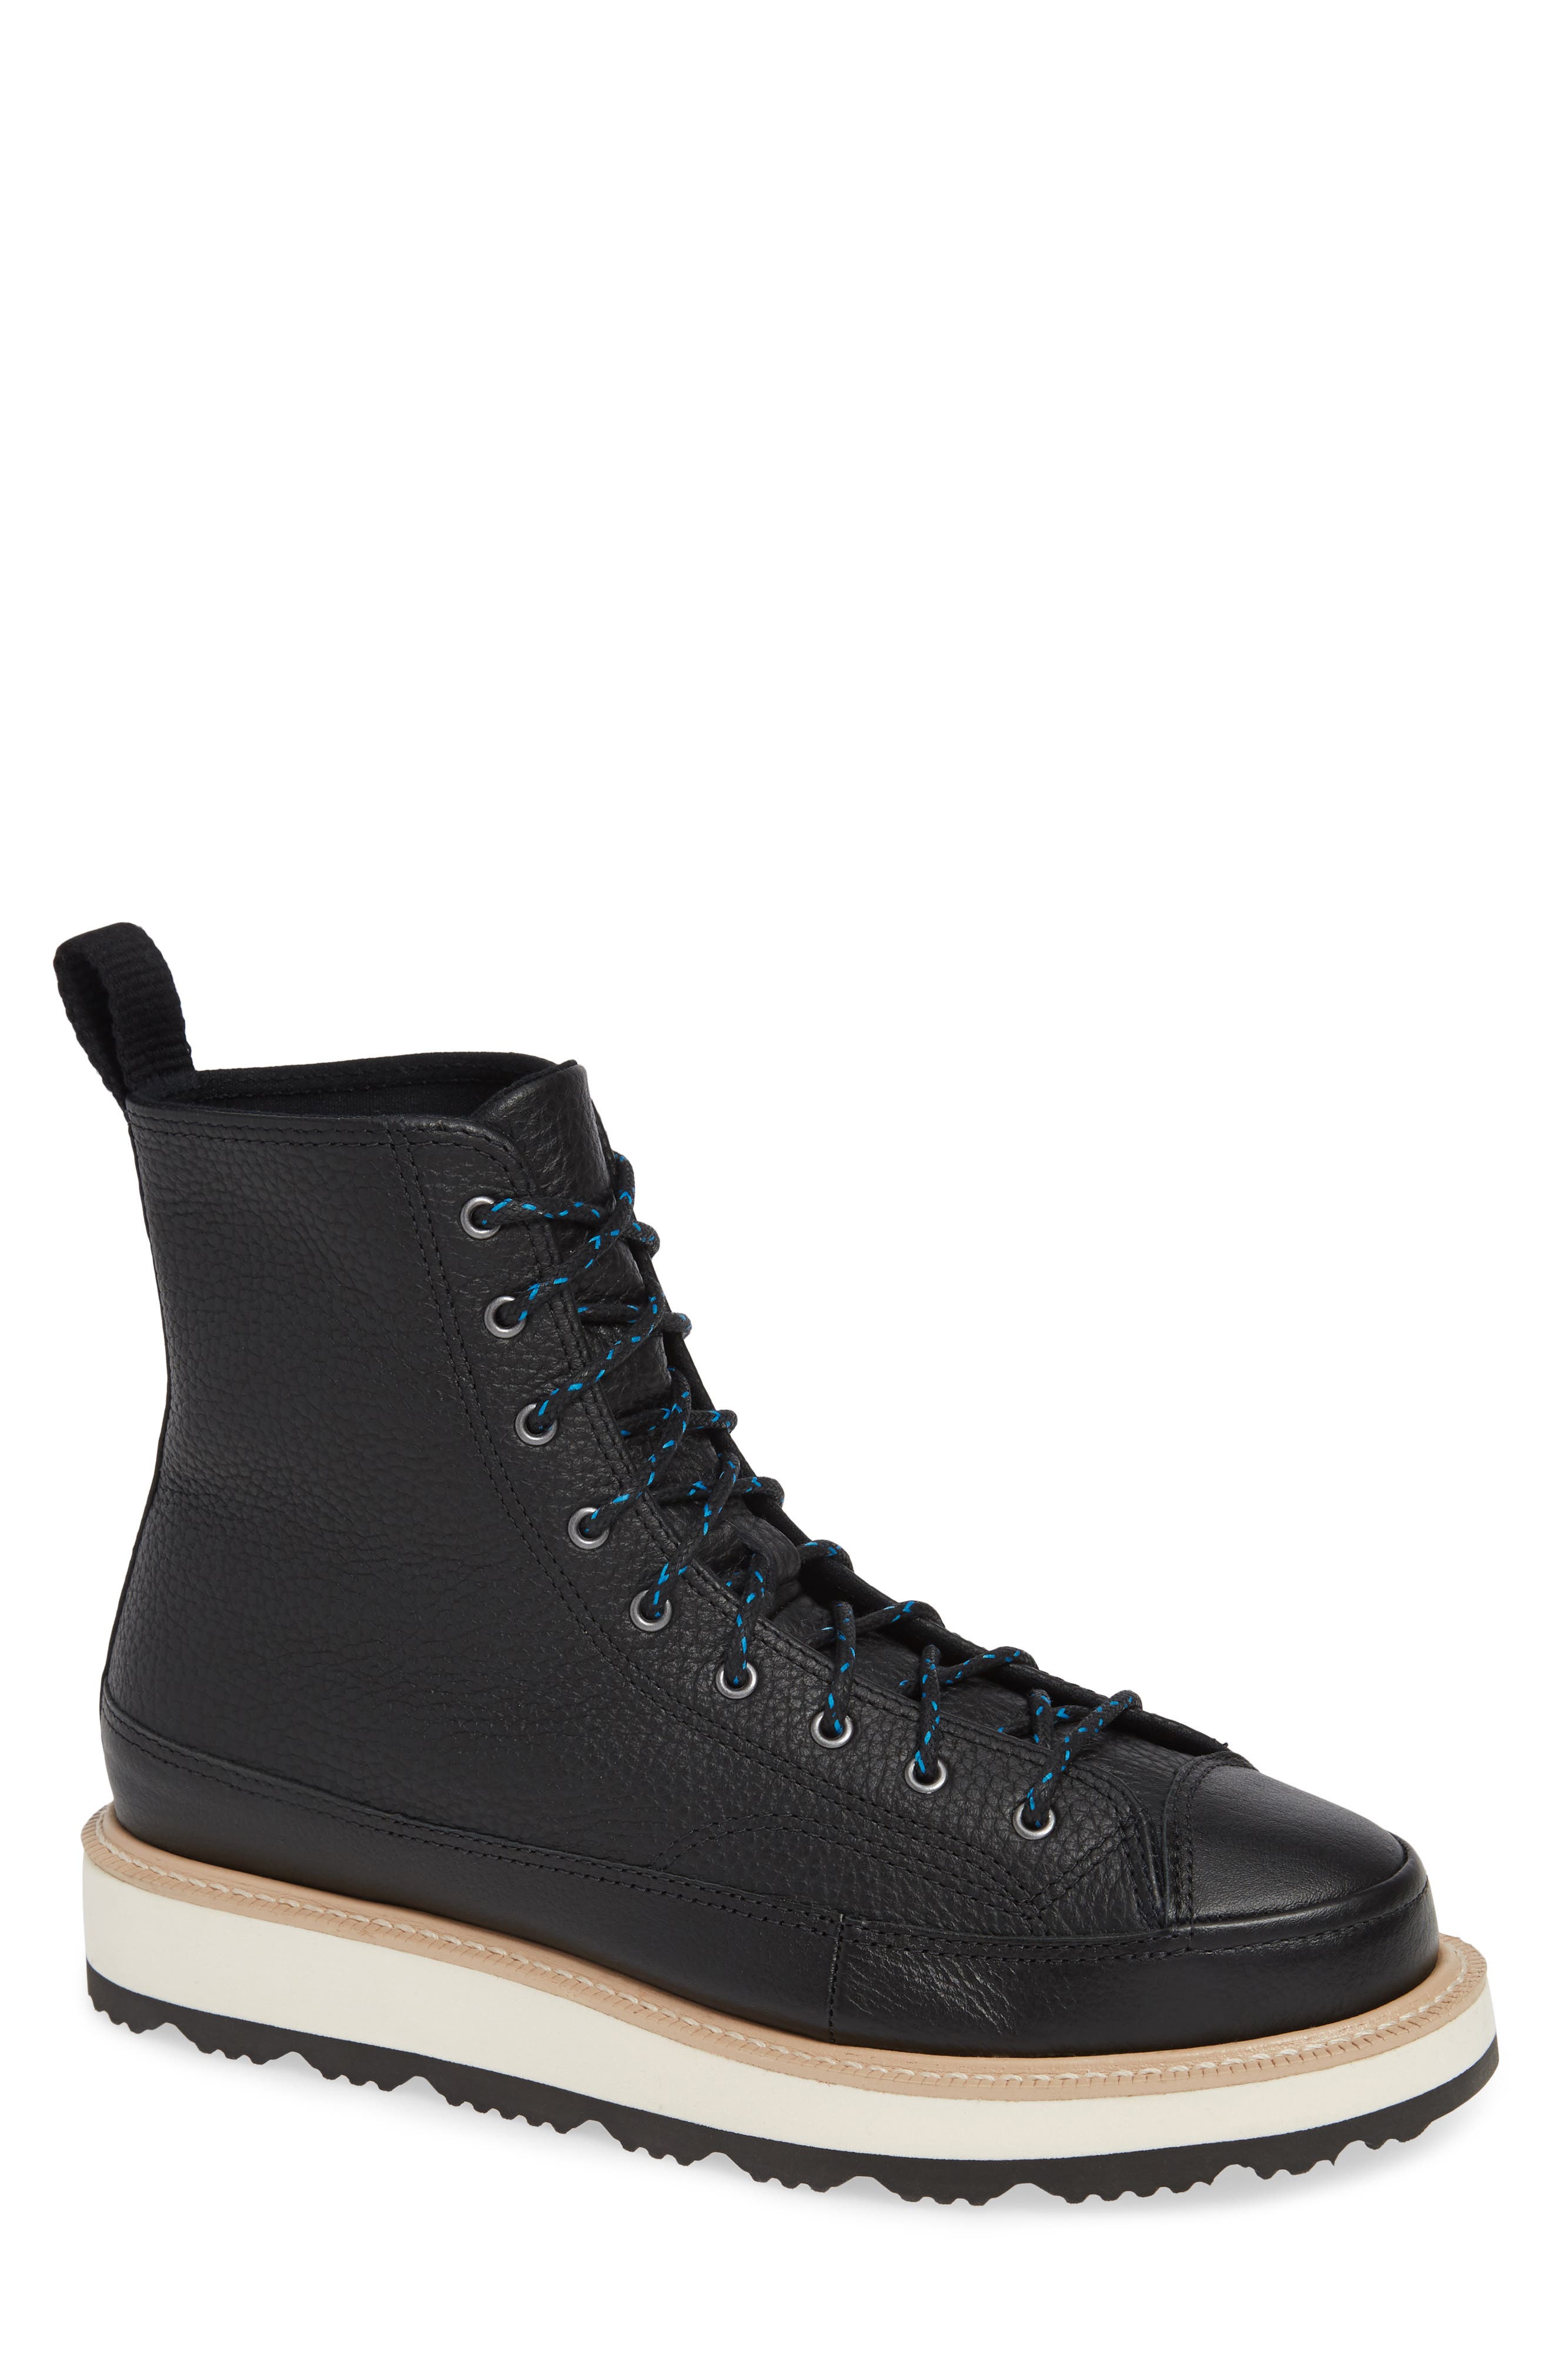 converse chuck taylor all stars crafted boot high